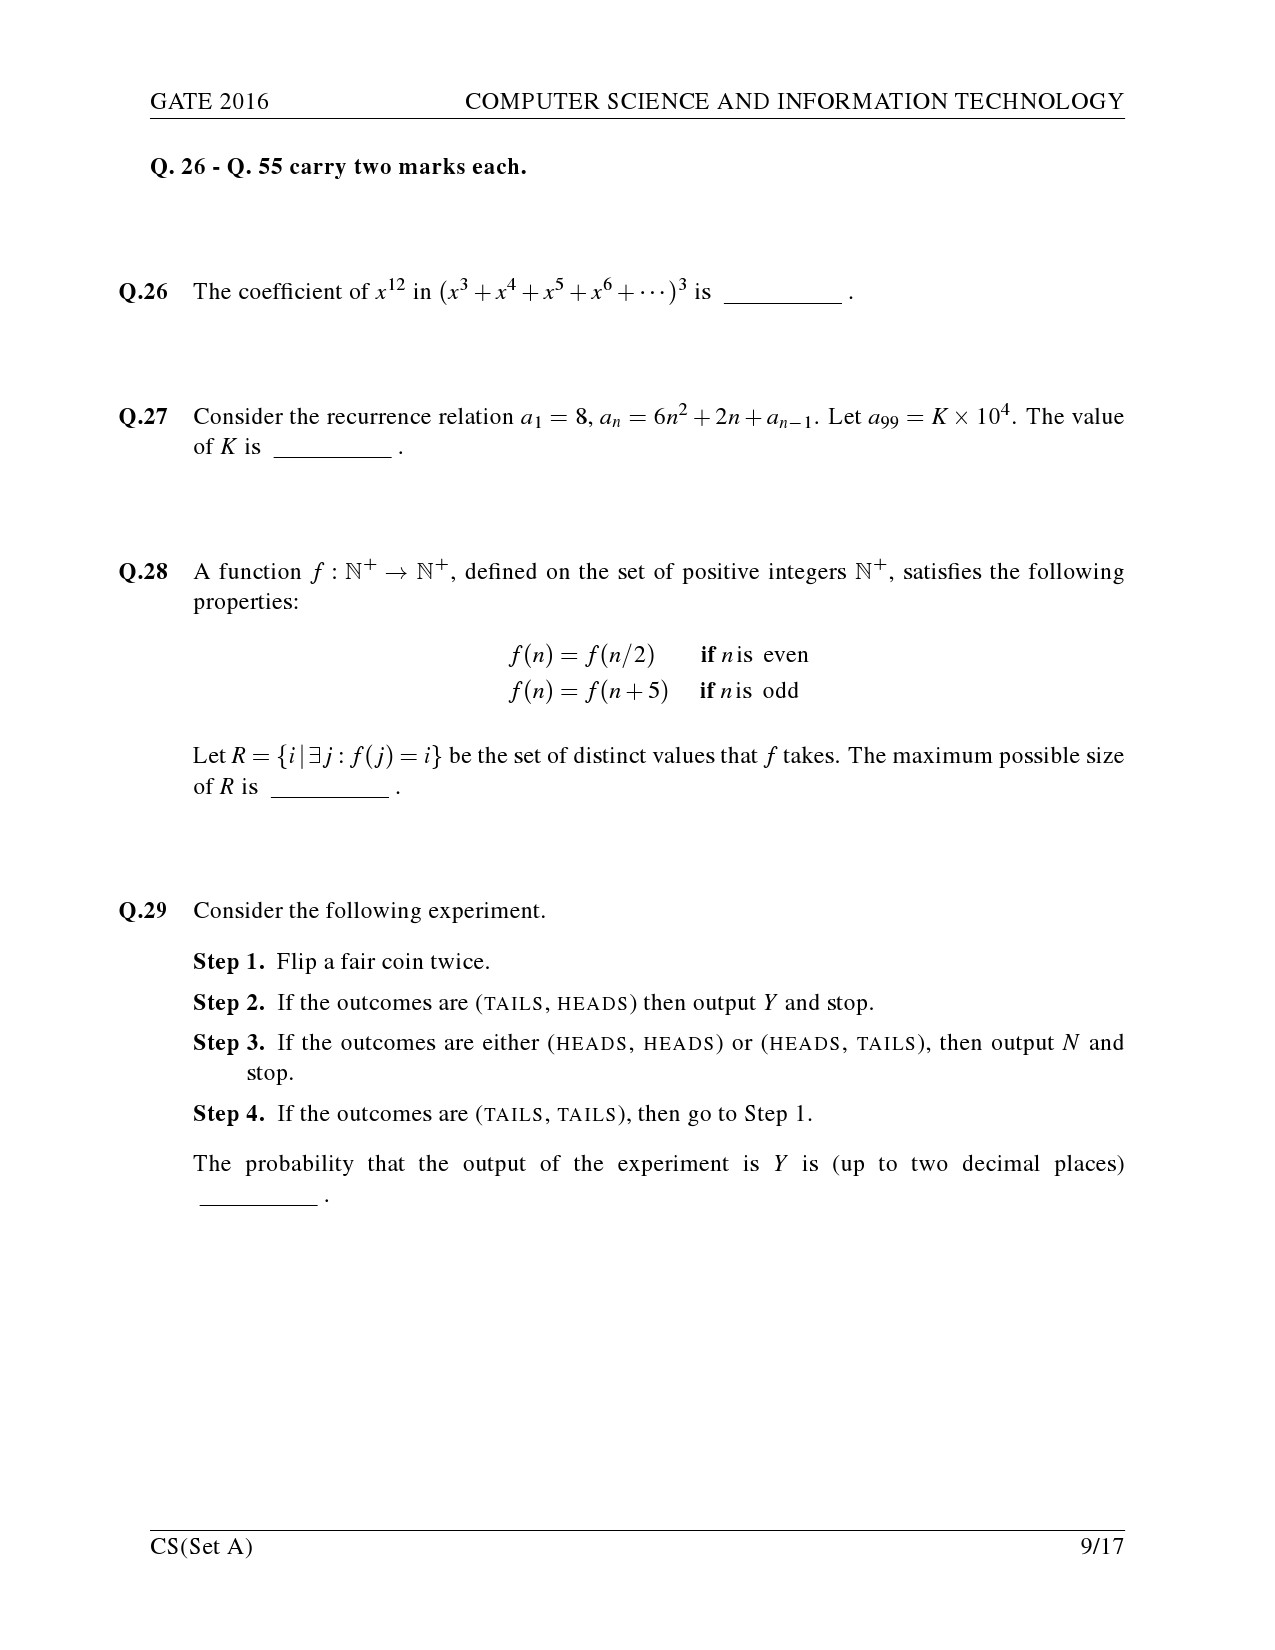 GATE Exam Question Paper 2016 Computer Science and Information Technology Set A 12